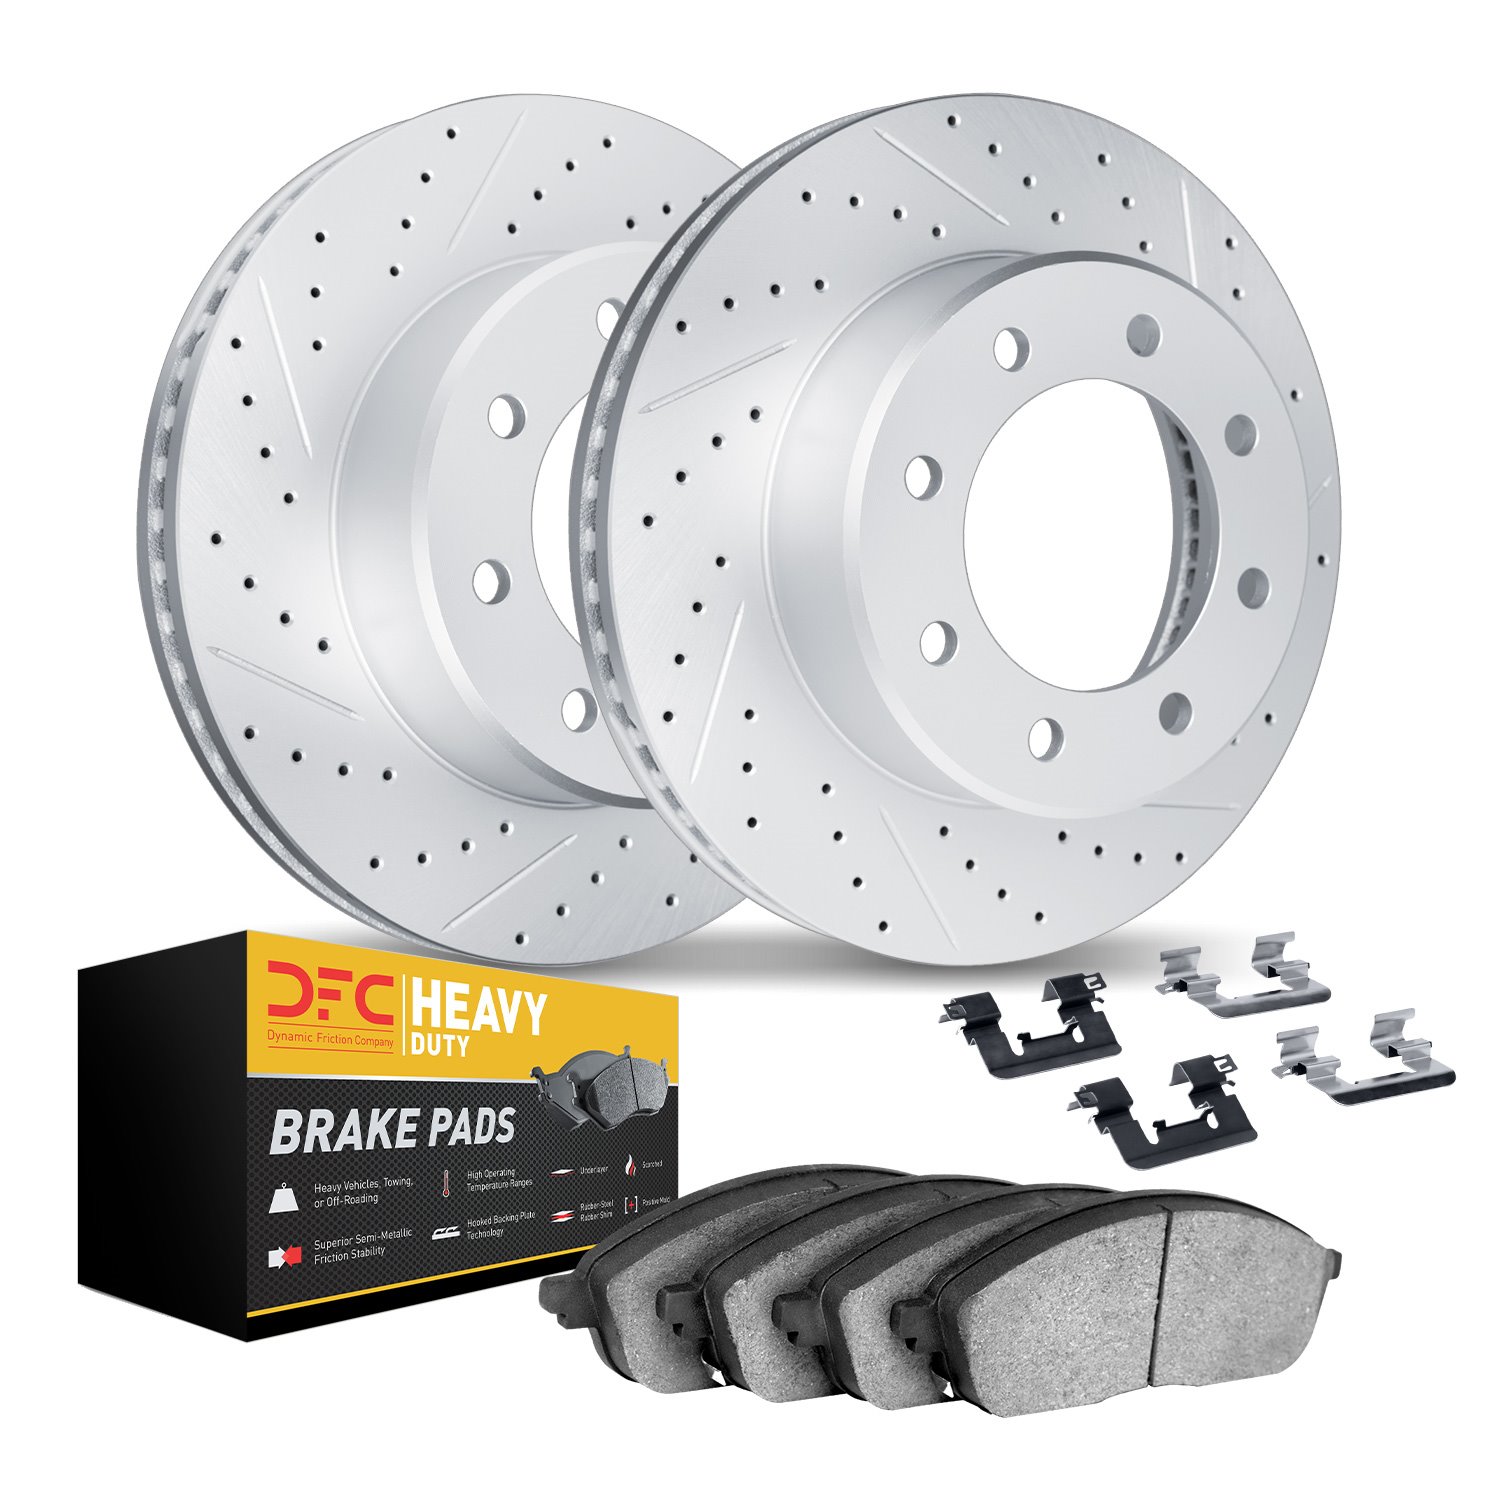 2212-99110 Geoperformance Drilled/Slotted Rotors w/Heavy-Duty Pads Kit & Hardware, 1999-2007 Ford/Lincoln/Mercury/Mazda, Positio